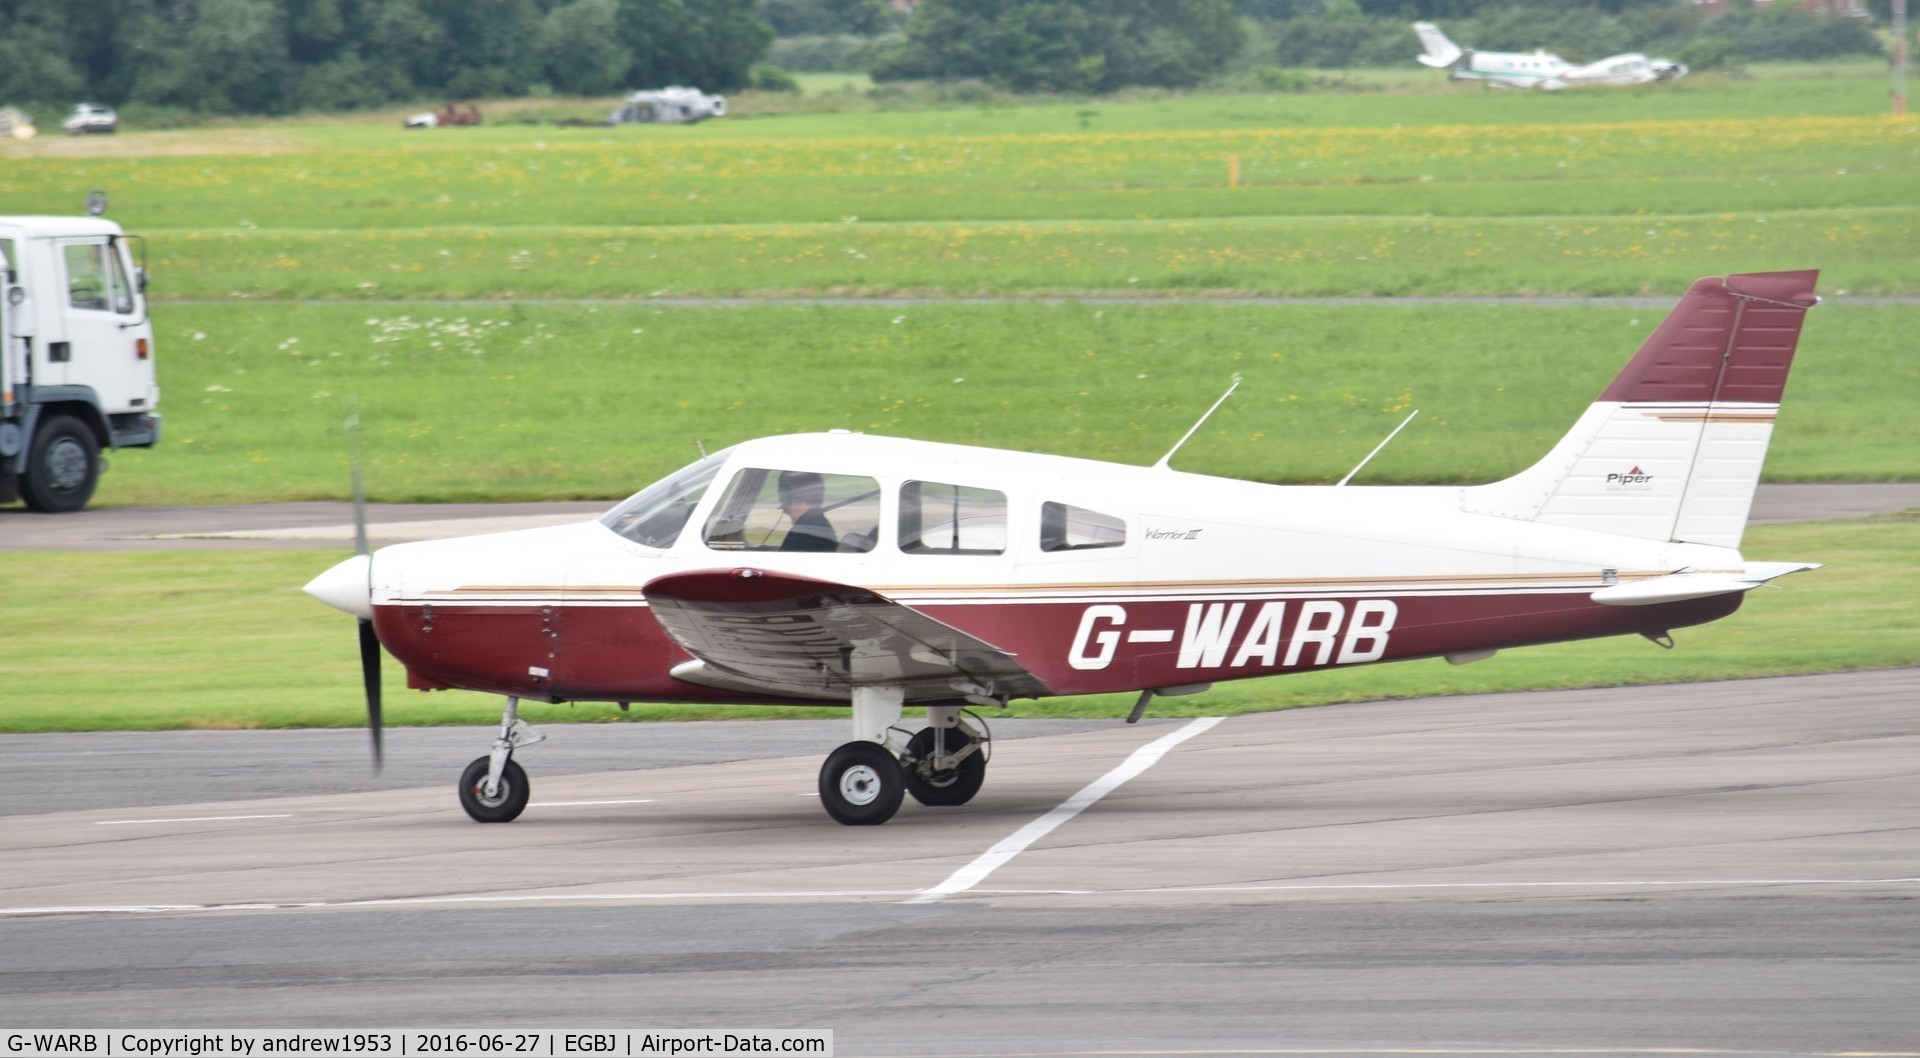 G-WARB, 1998 Piper PA-28-161 Cherokee Warrior III C/N 28-42034, G-WARB at Gloucestershire Airport.